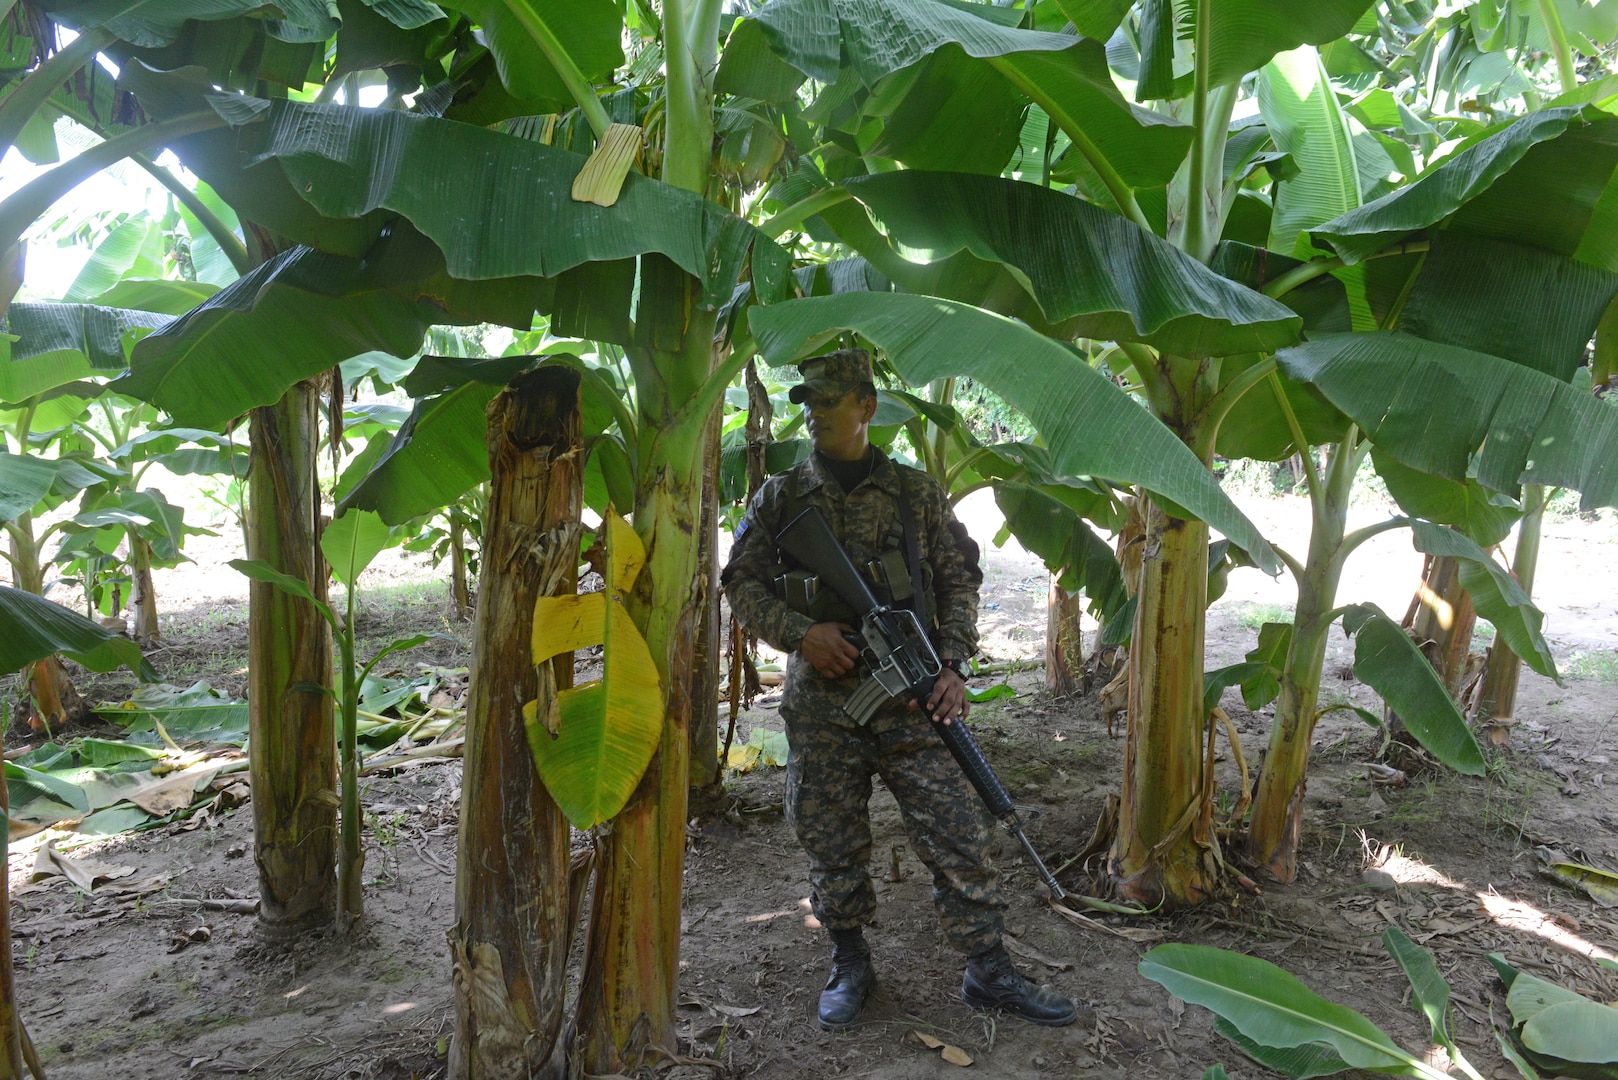 A Salvadoran soldier provides security at the perimeter of a school construction site, June 25, 2018, in La Paz Department, El Salvador. The construction is part of U.S. Army South-led Beyond the Horizon exercise lasting May 12 through Aug. 4, 2018.